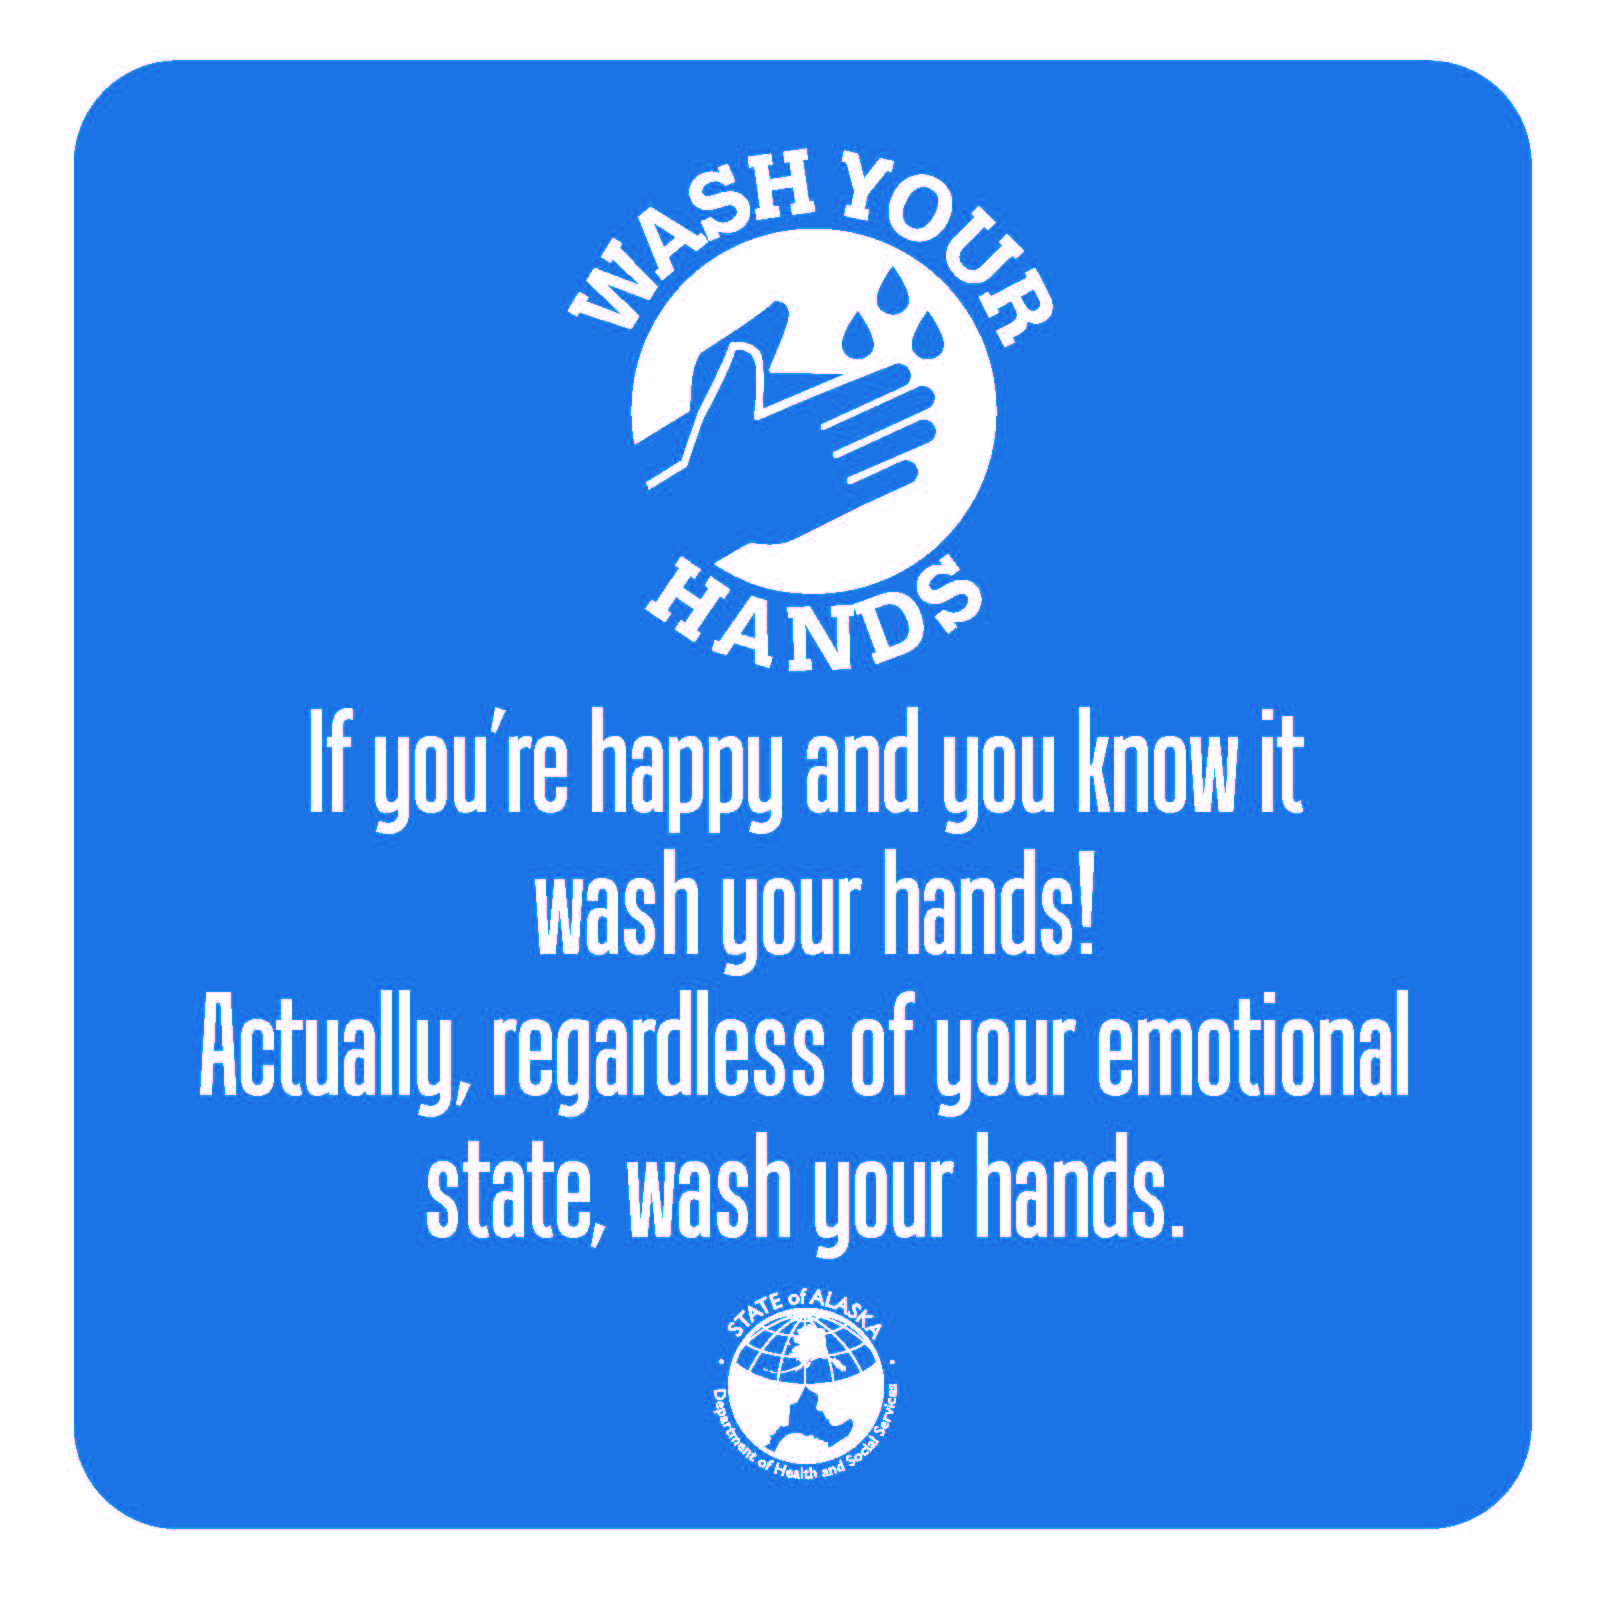 Wash your hands: If you're happy and you know it, wash your hands! Actually, regardless of your emotional state, wash your hands